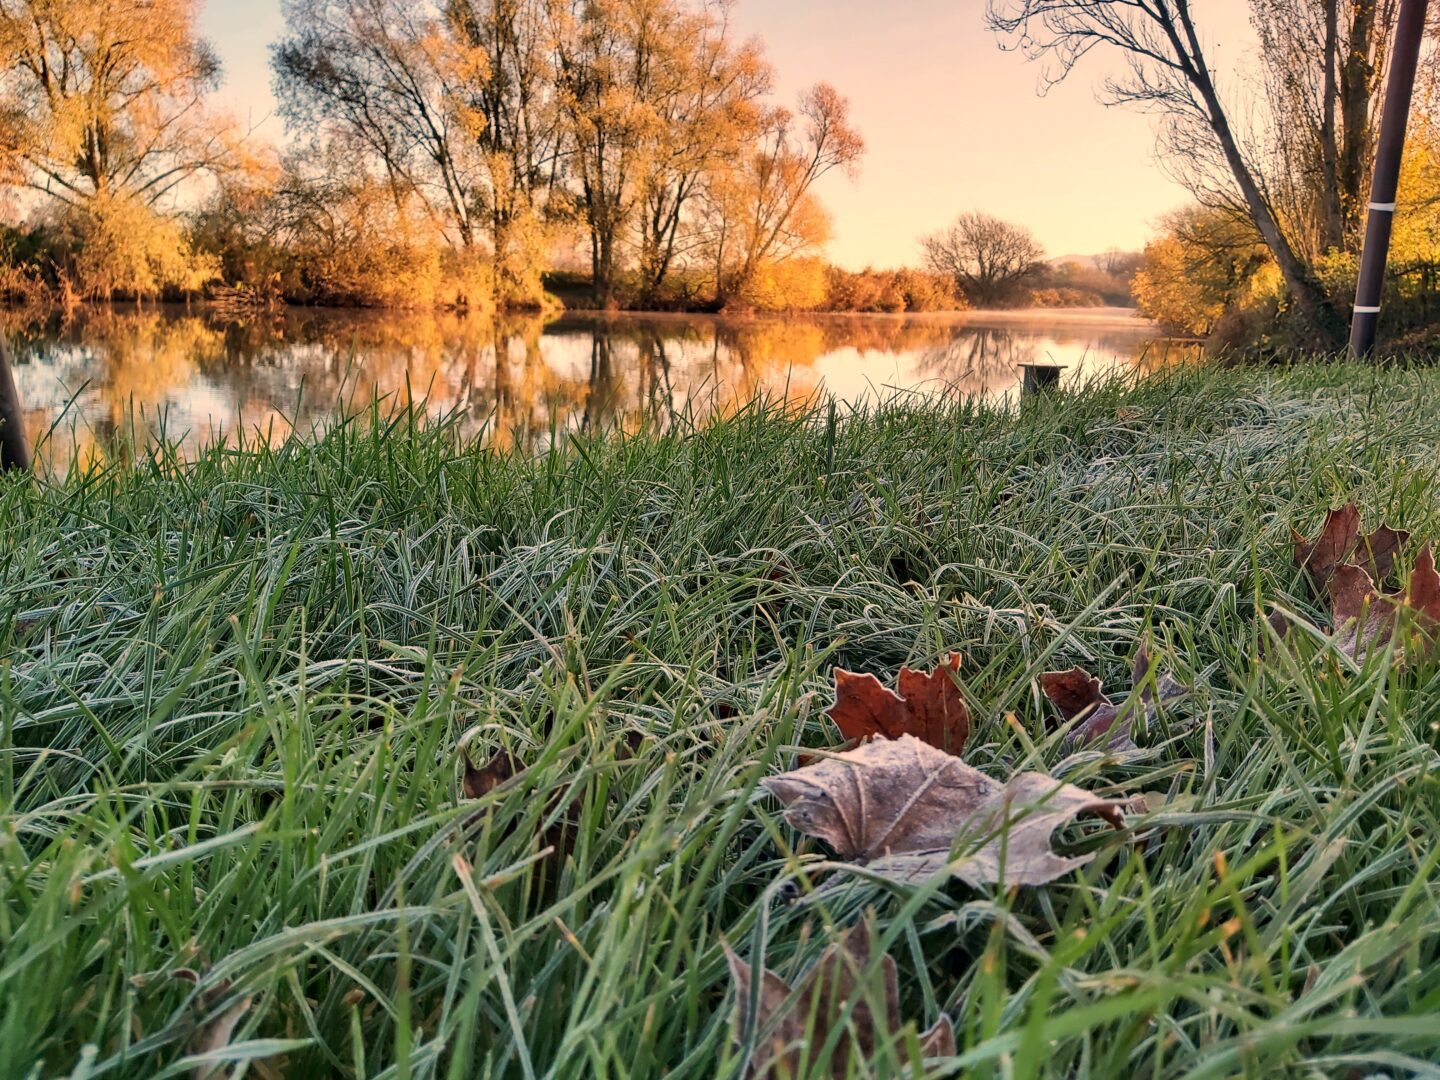 Frosty grass with river at sunrise in the background to illustrate warming up after cold water swimming